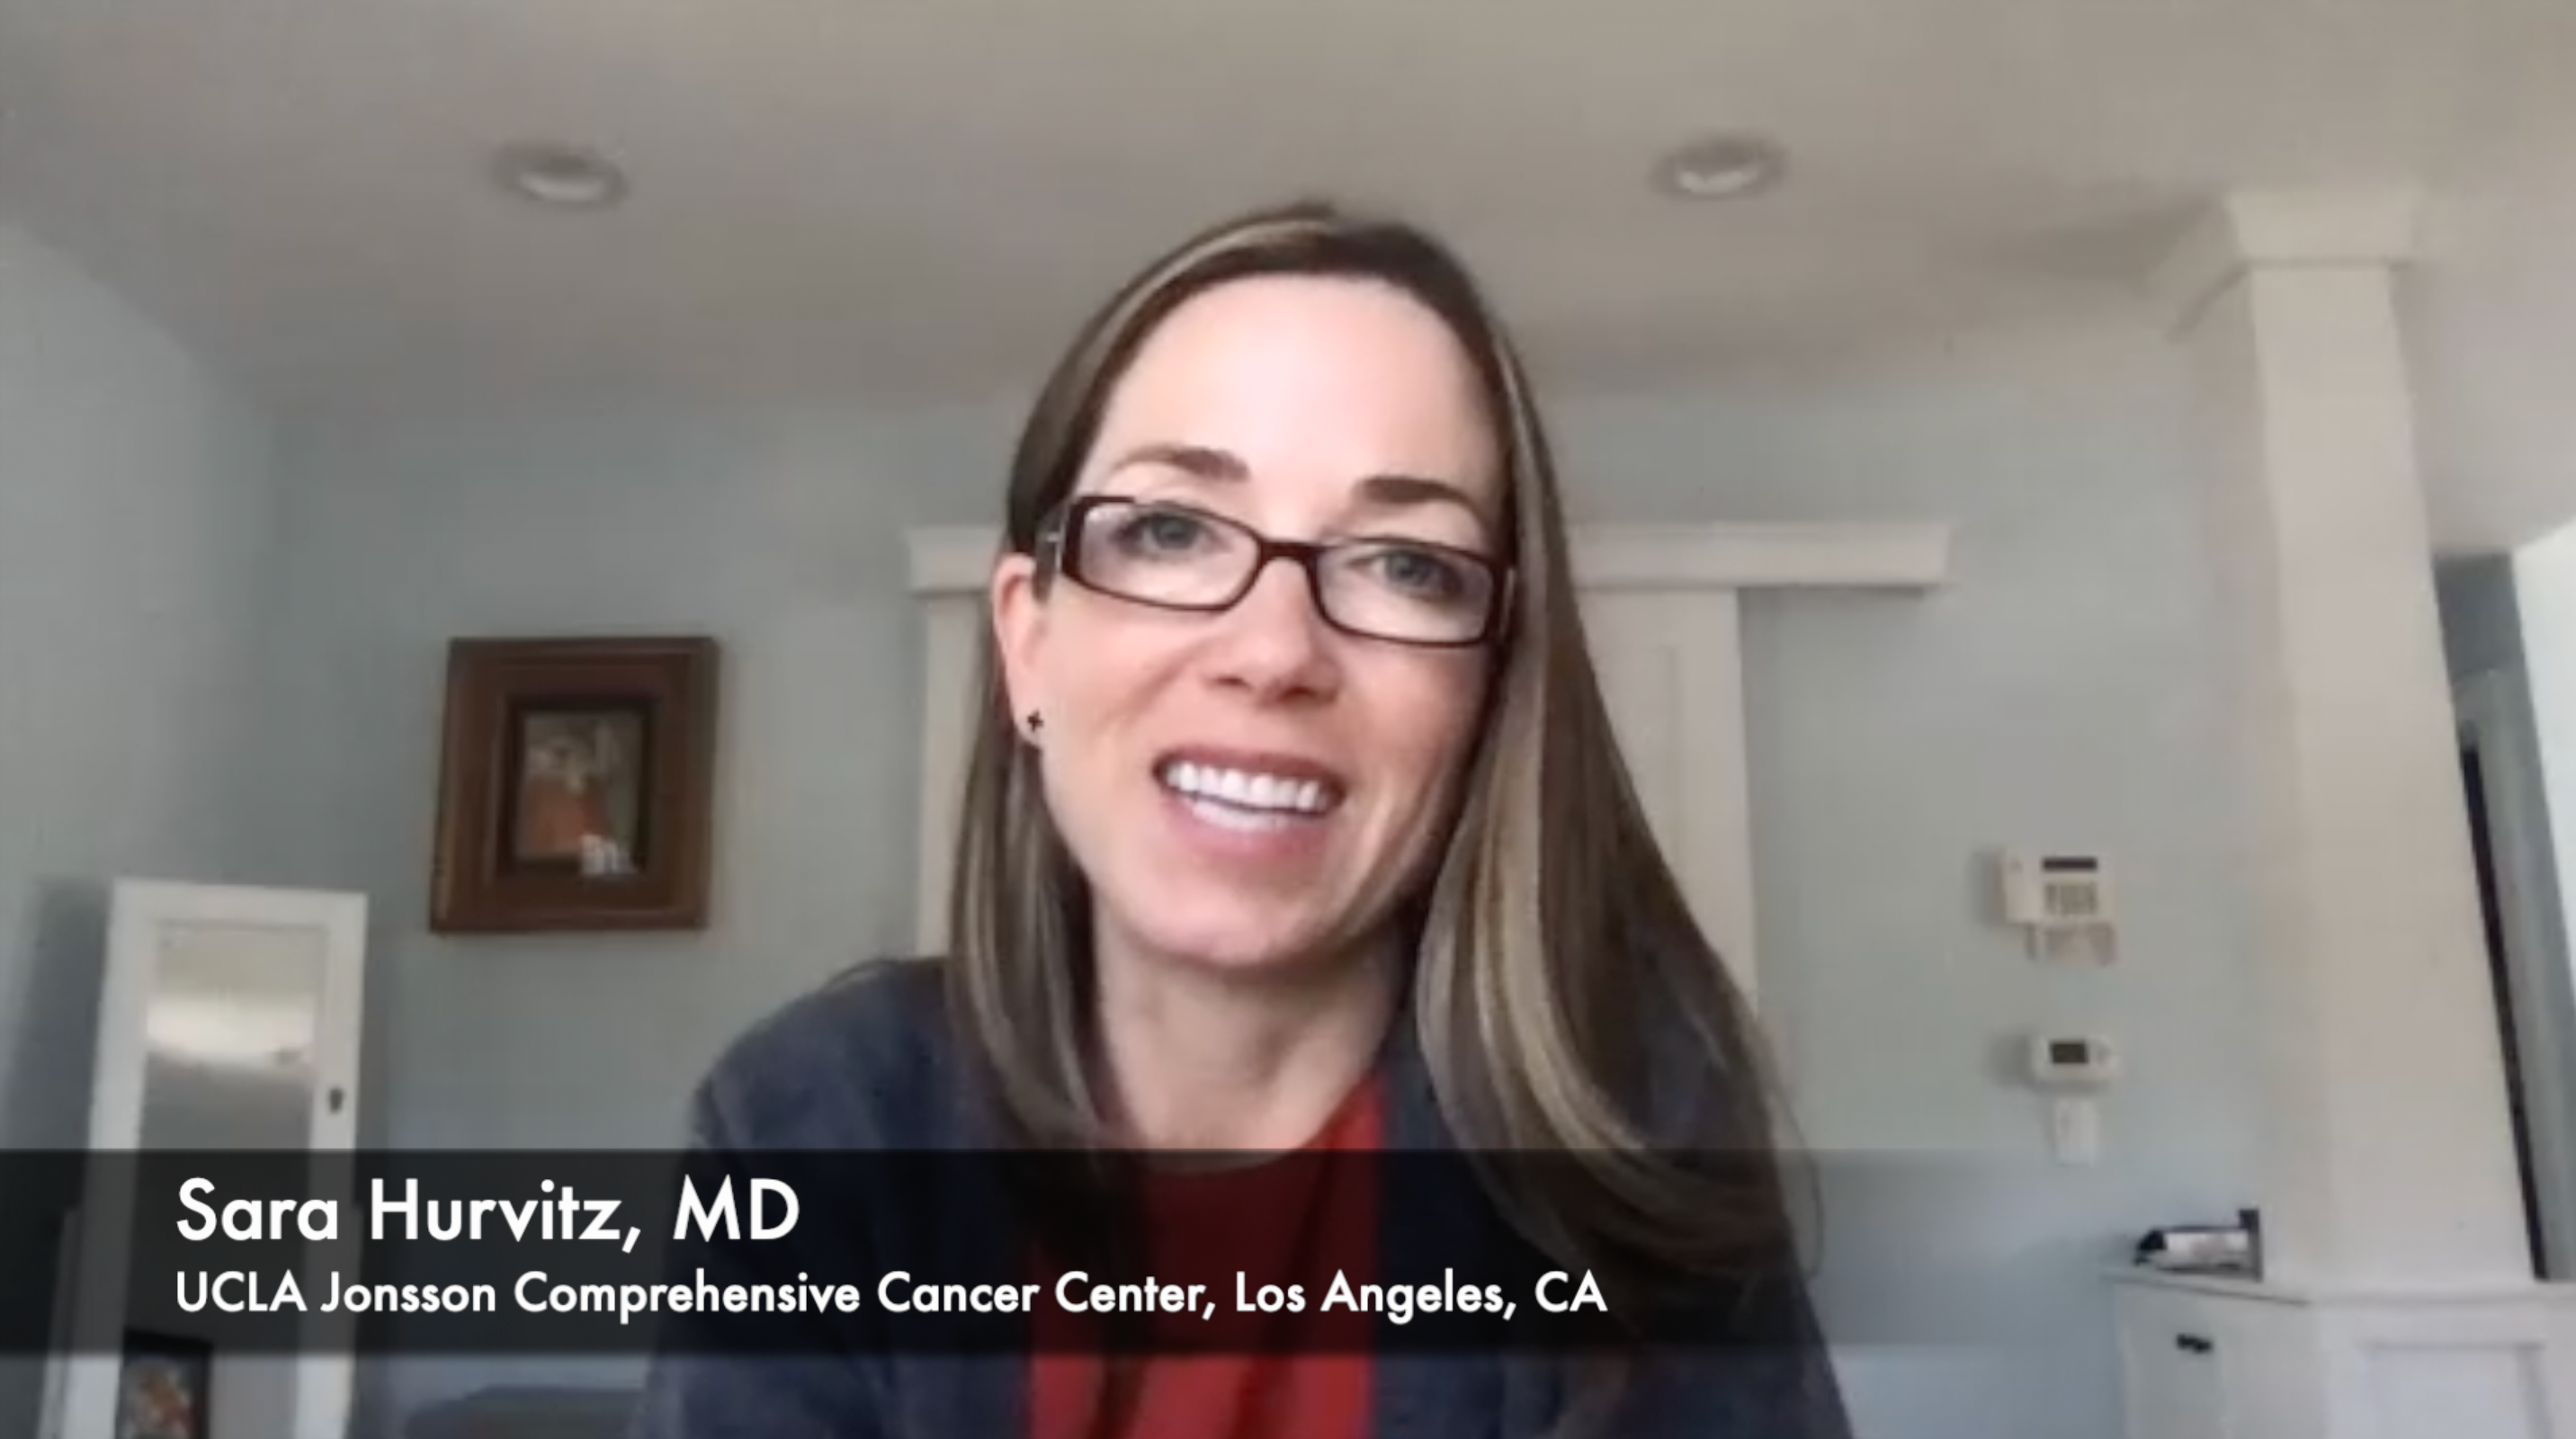 Sara A. Hurvitz, MD, Discusses Outcomes With Sacituzumab Govitecan By Age for Metastatic Triple-Negative Breast Cancer